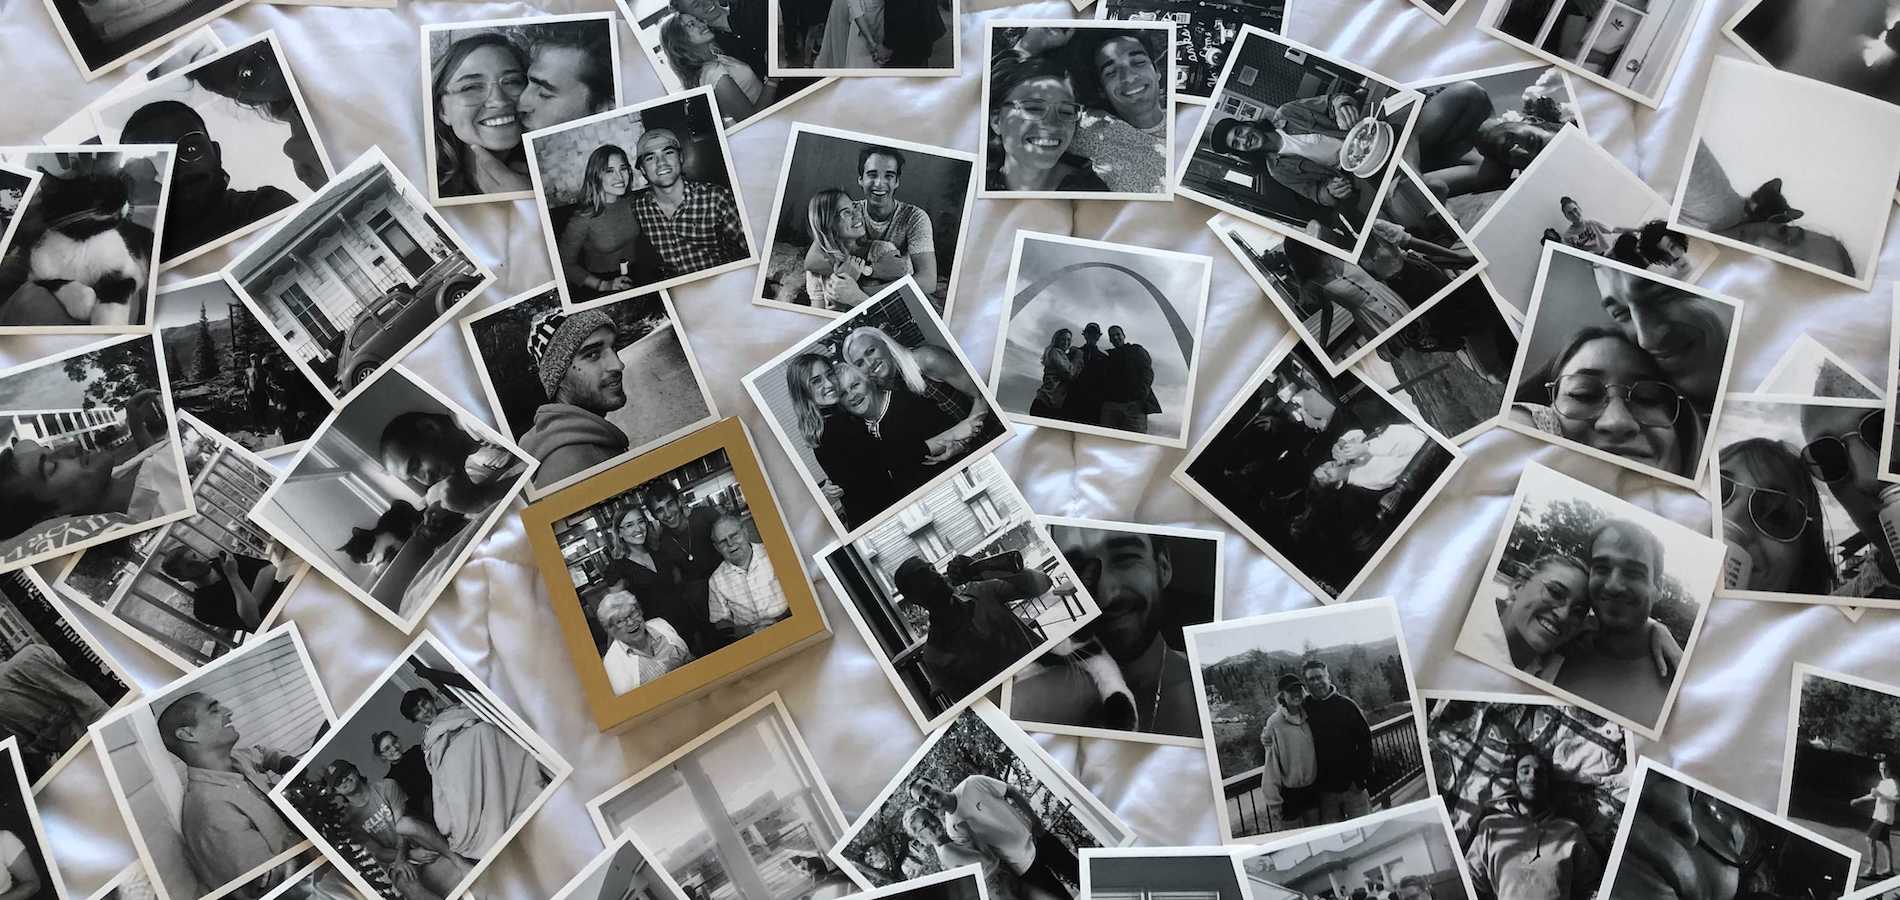 Artifact Uprising photo prints scattered all over bed featuring black-and-white photos